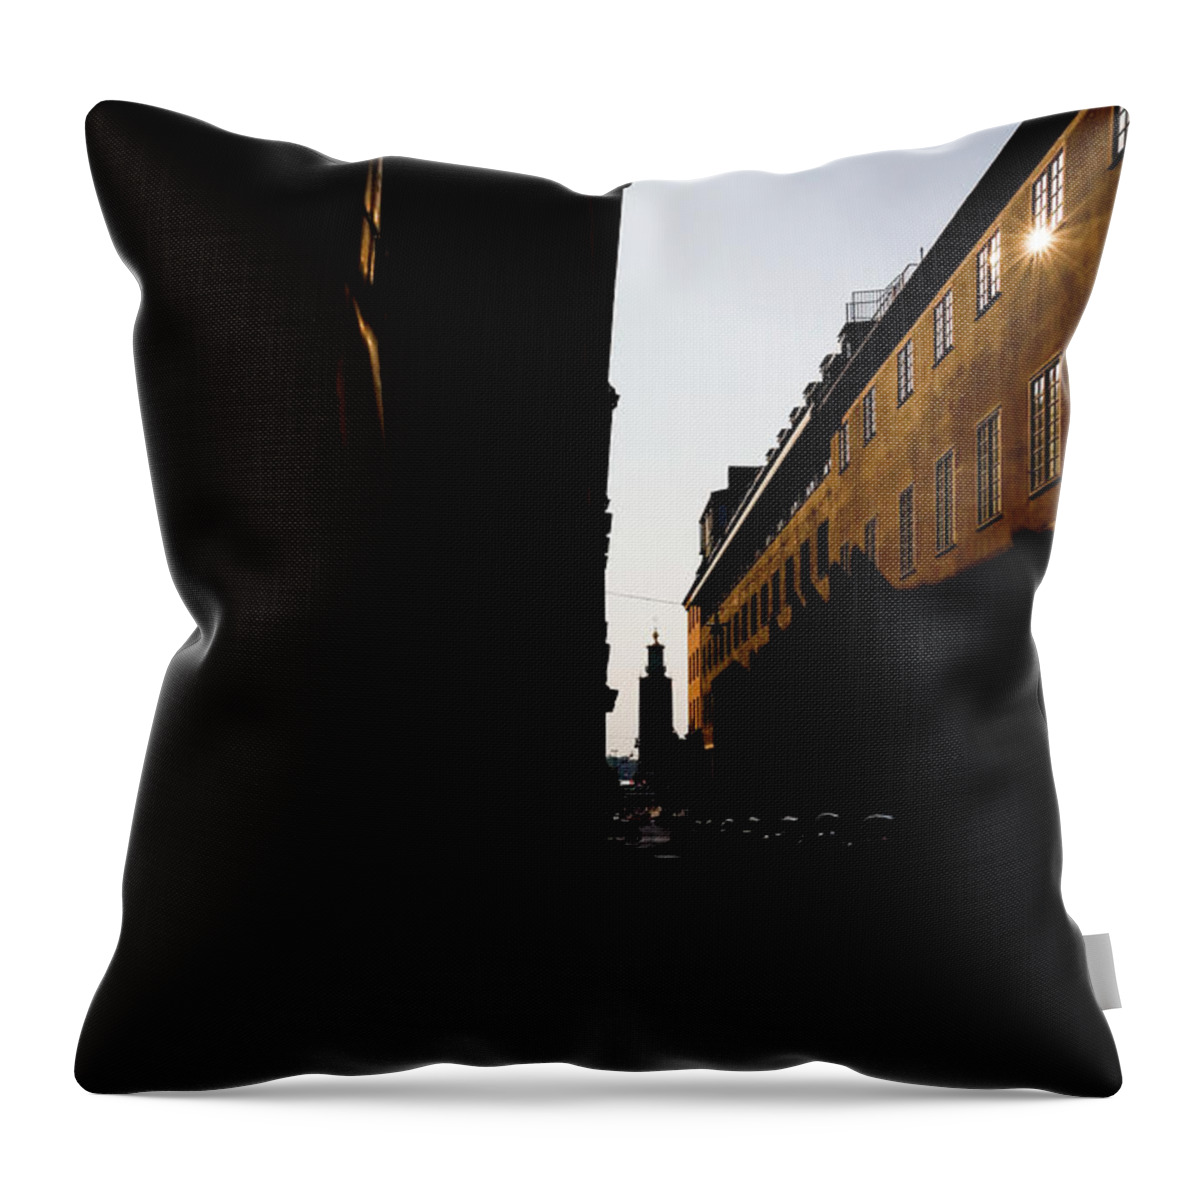 Europe Throw Pillow featuring the photograph City Hall Stockholm by Alexander Farnsworth